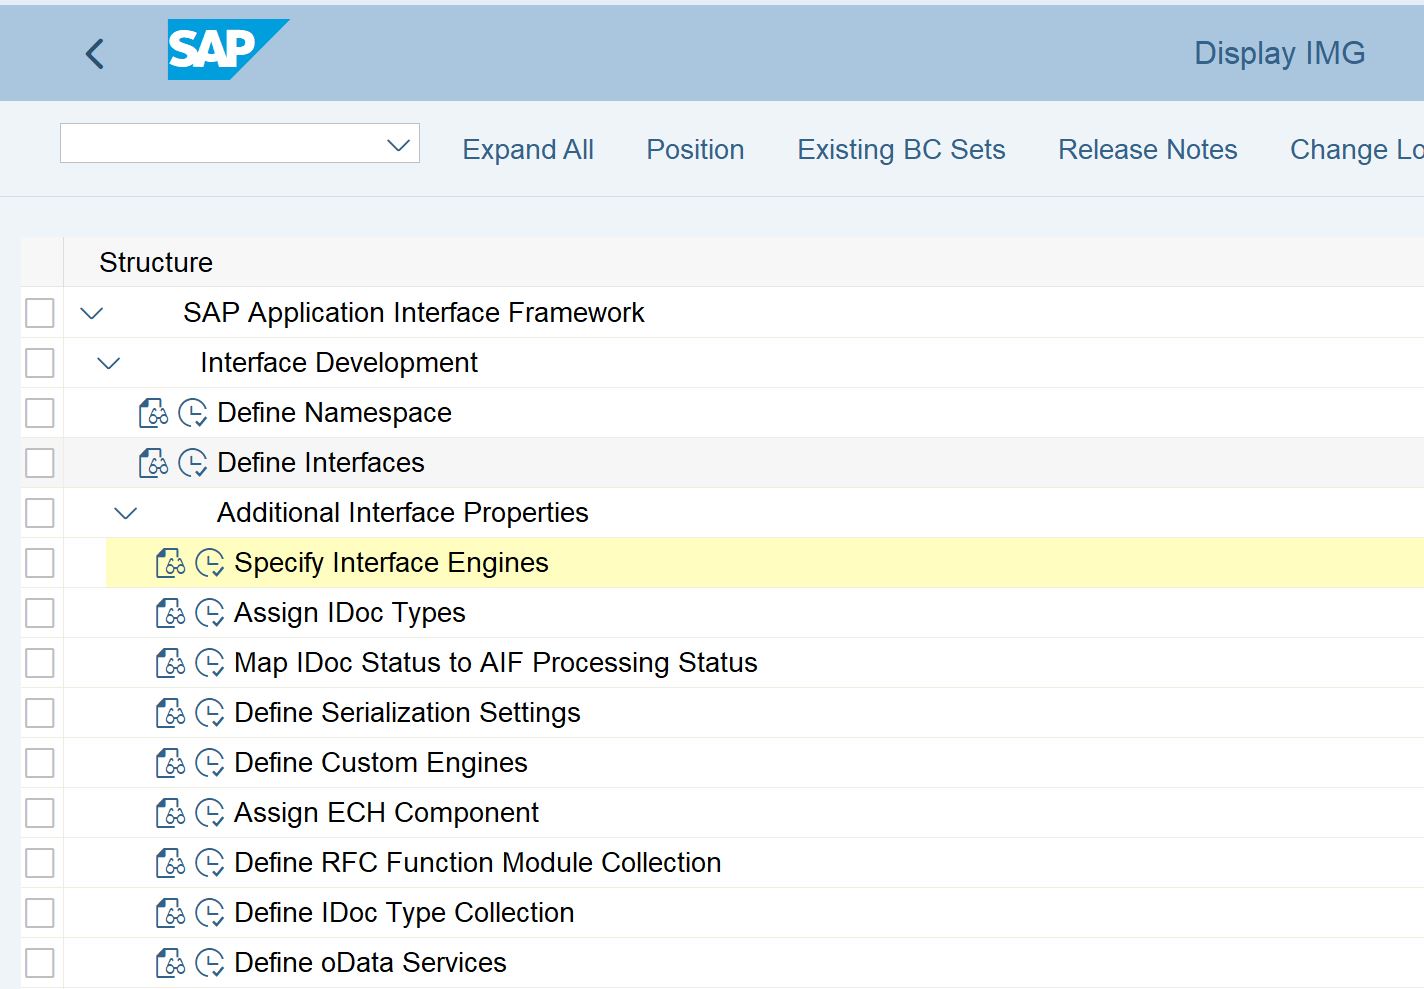 8. Types of Interfaces Supported by SAP AIF